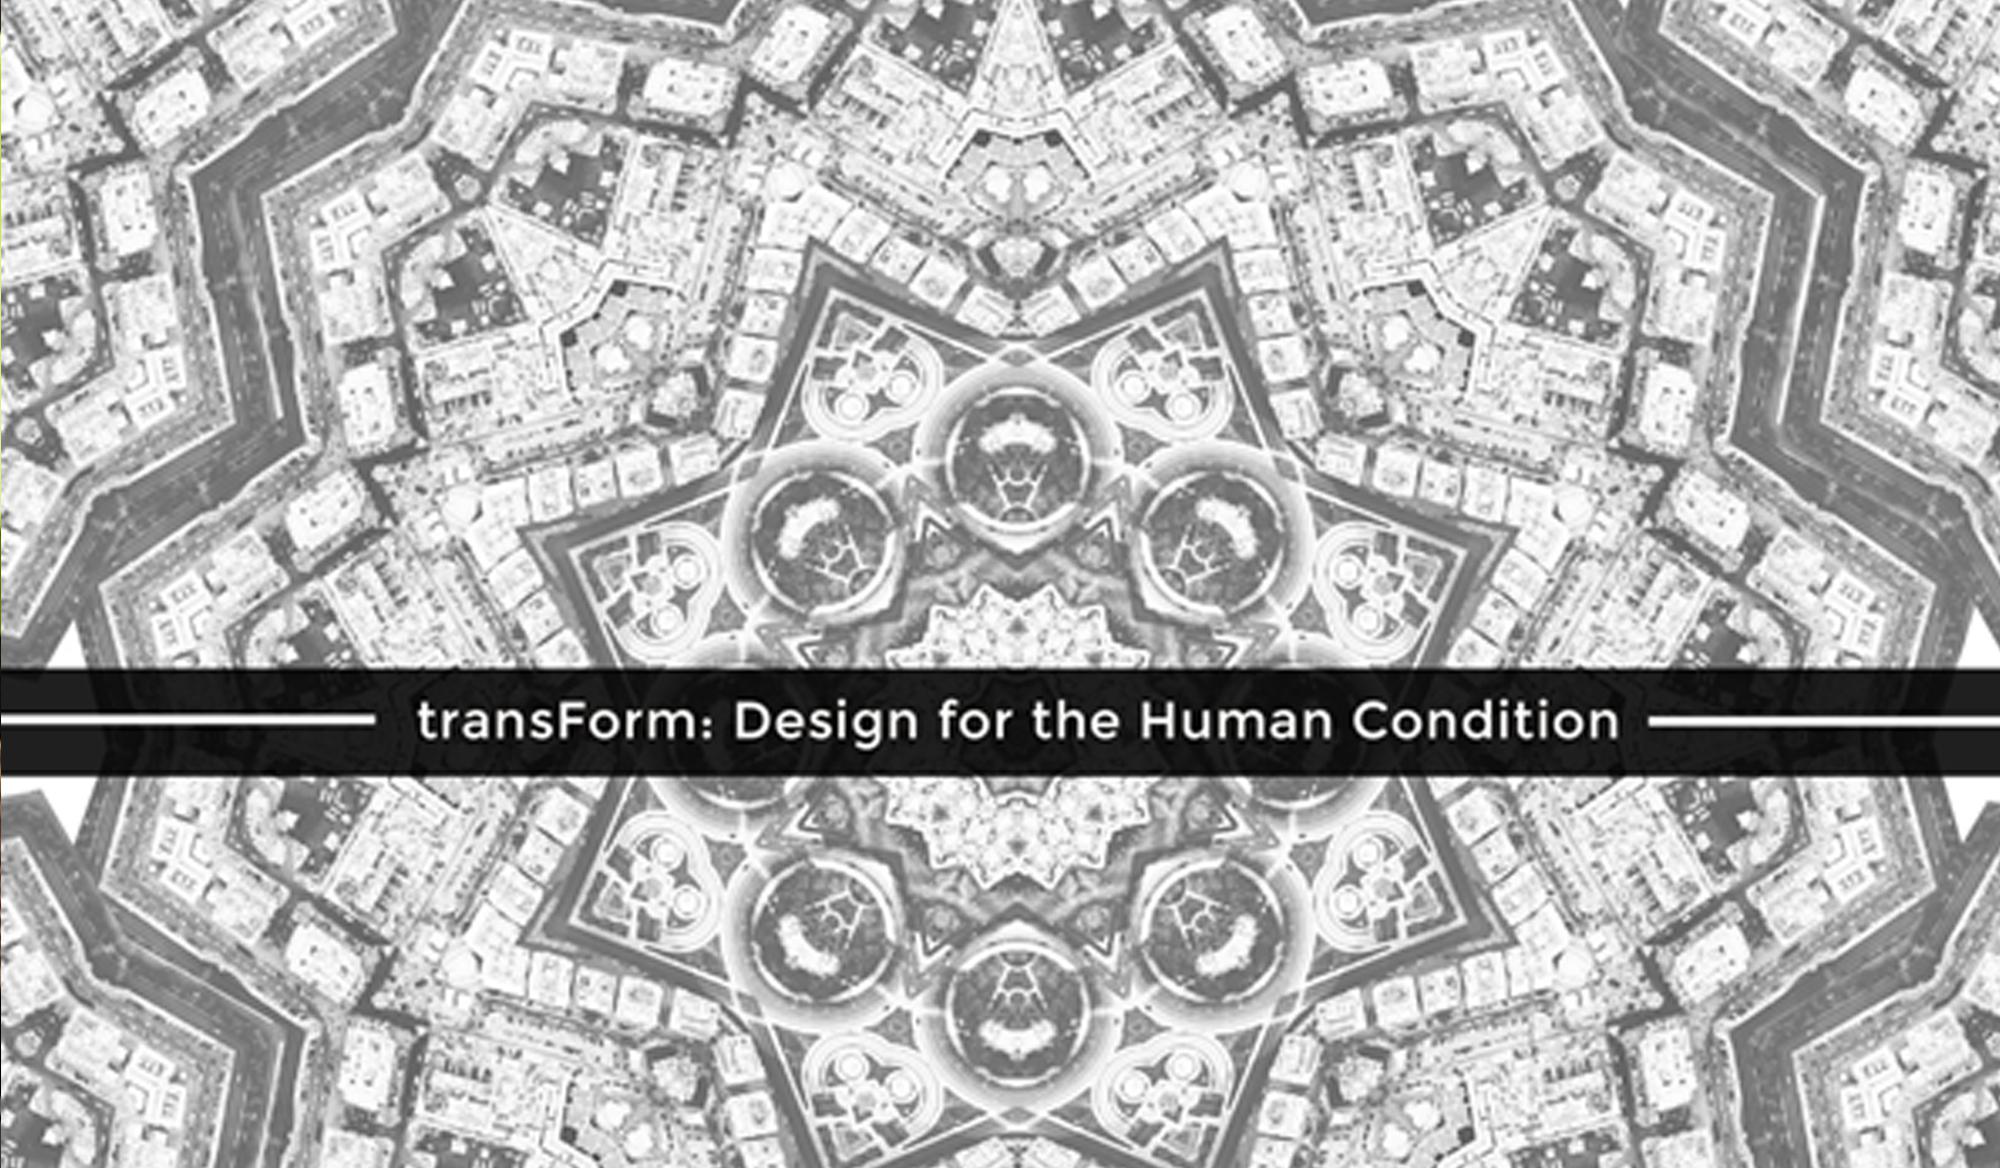 transForm: Design for the Human Condition